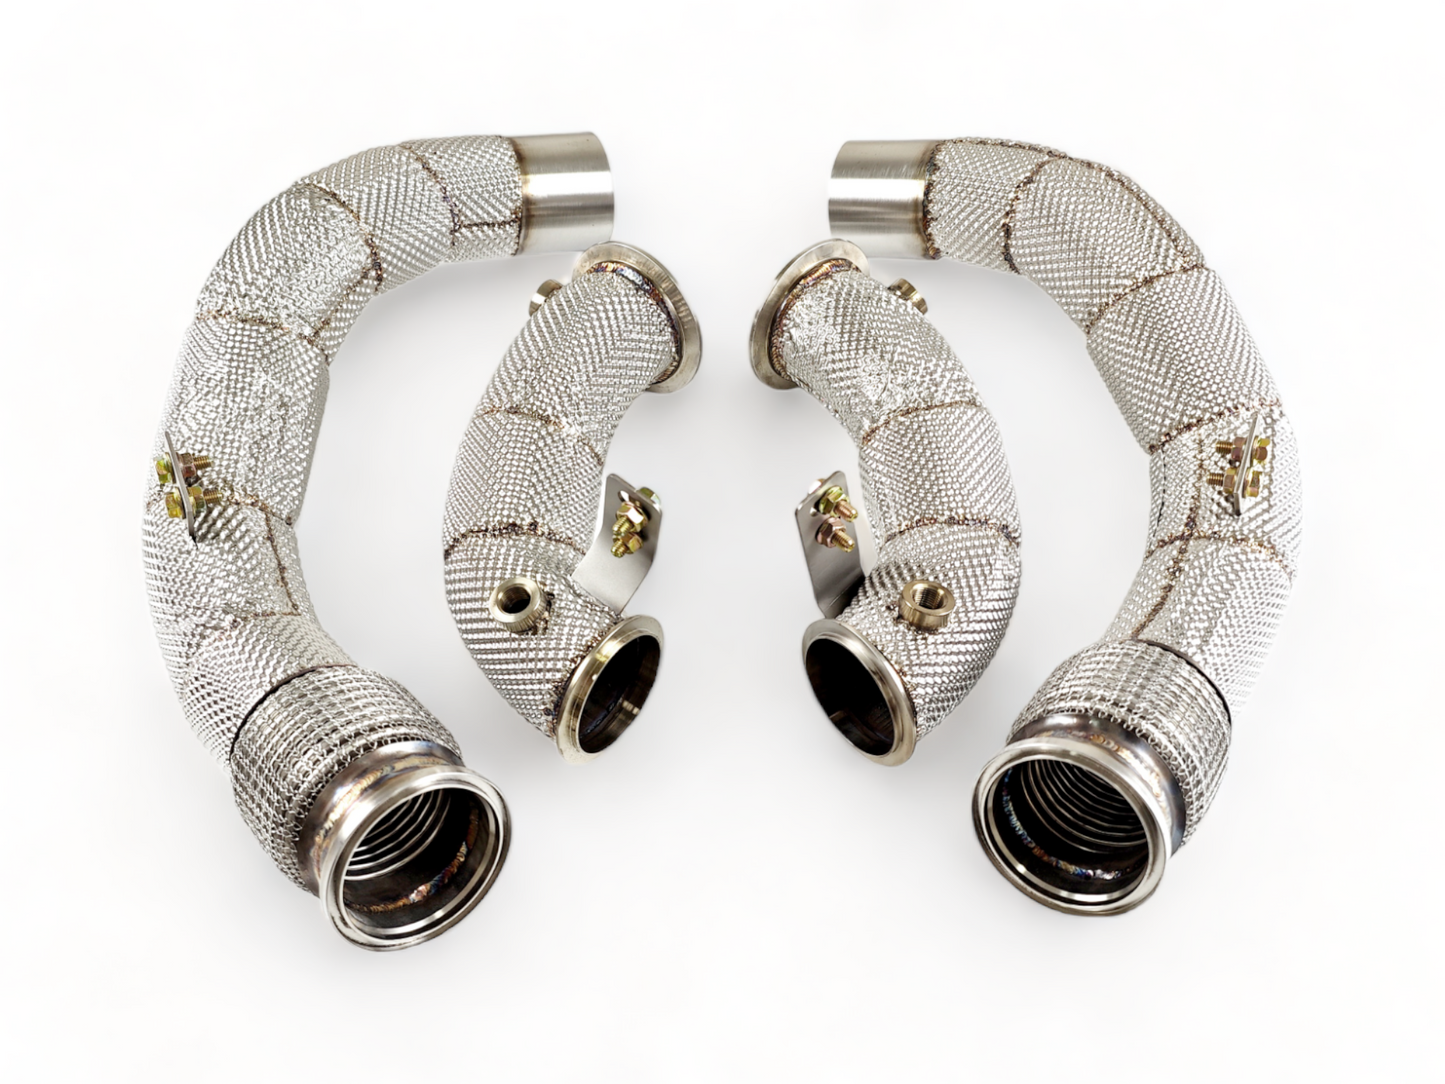 Heat-shielded Primary and Secondary Downpipes F90 M5 / F9X M8 S63TU4